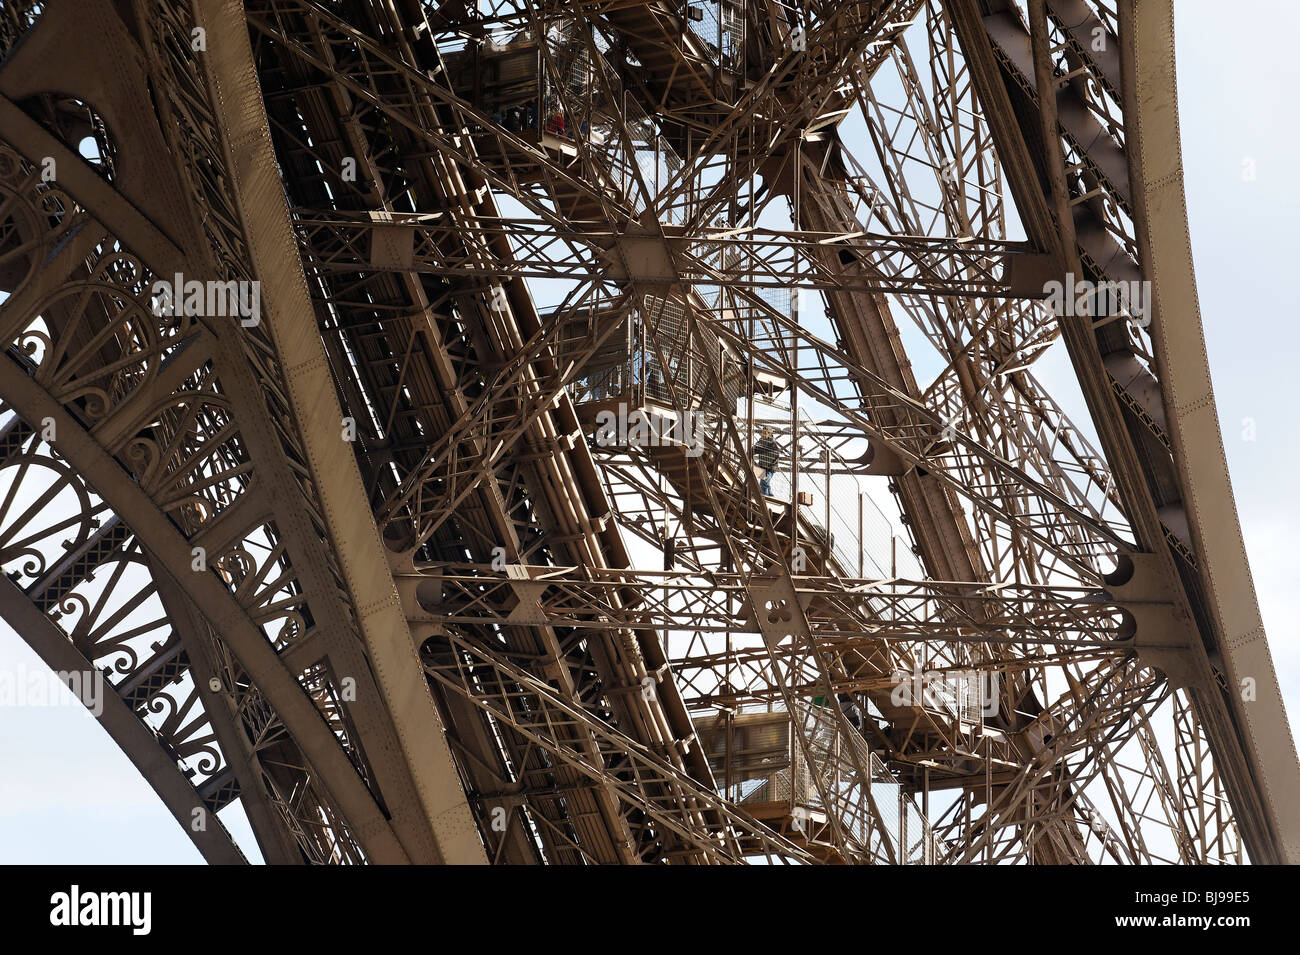 The Eiffel Tower structure in close up Stock Photo